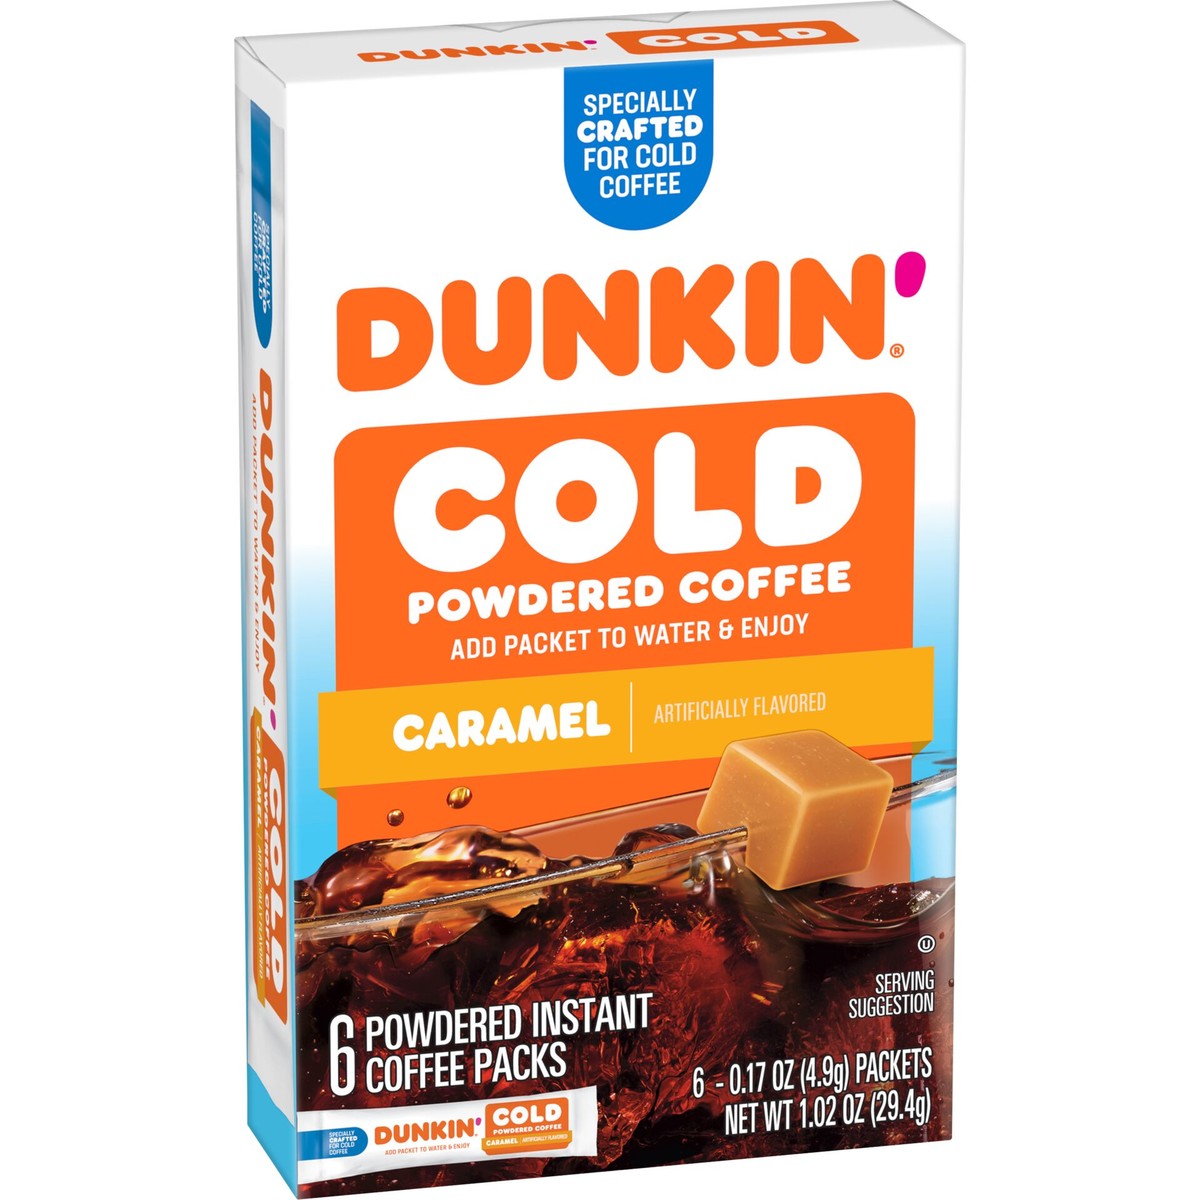 Caramel Flavored, Powdered Instant Iced Coffee Packets